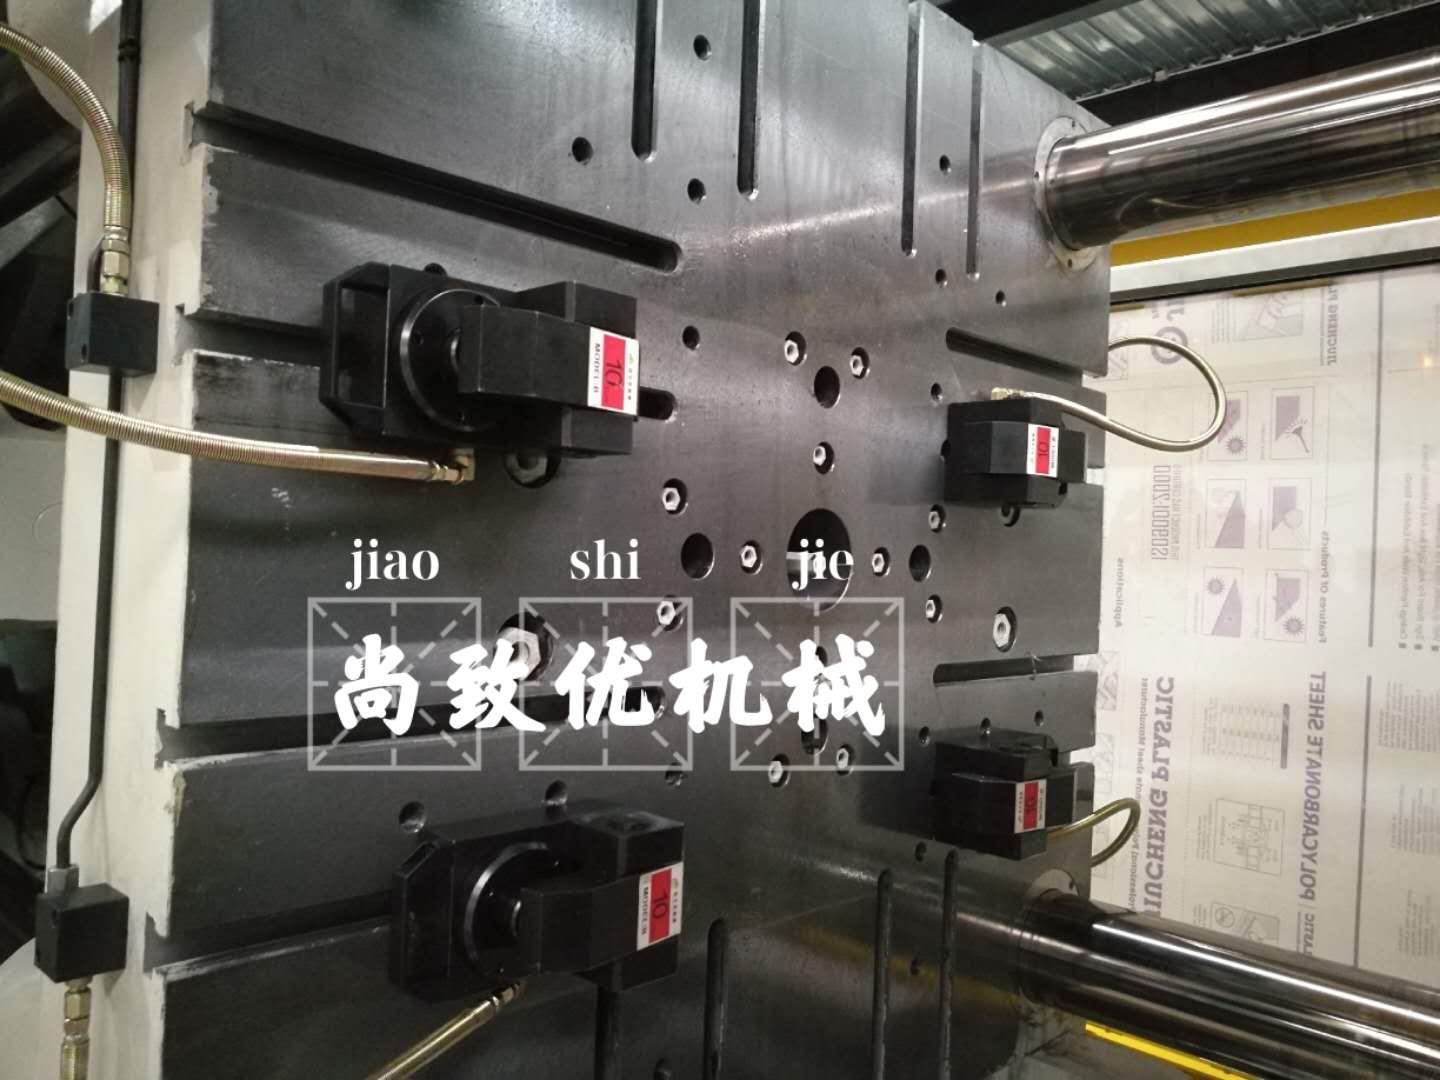 How to choose a suitable rapid mold changing system for injection molding machines?